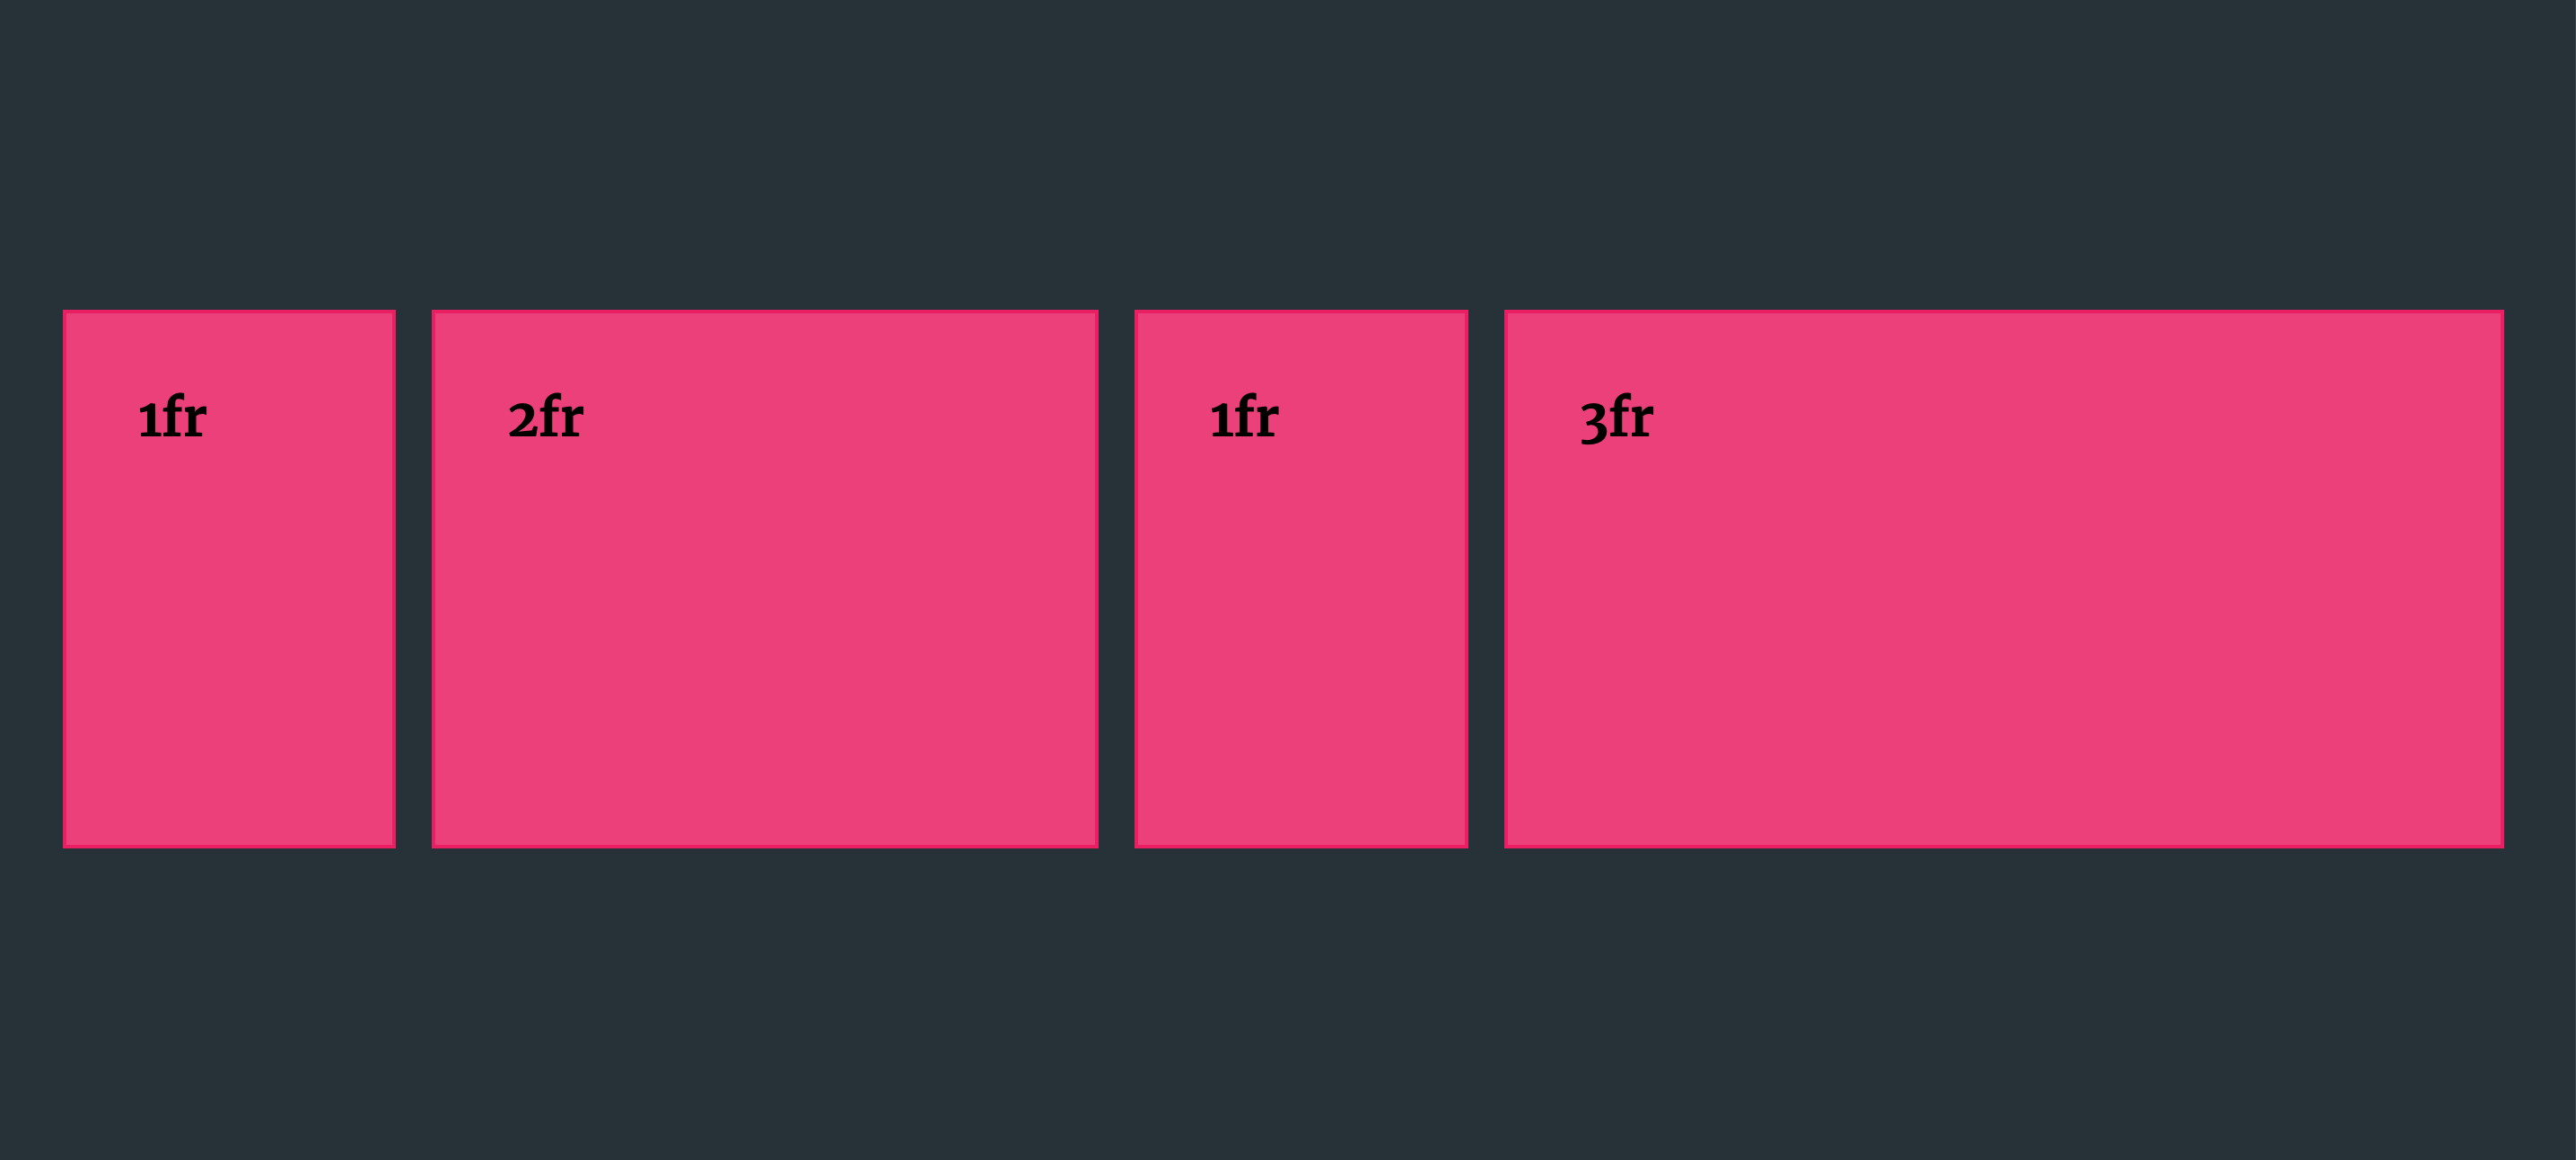 Four grid items of differing widths